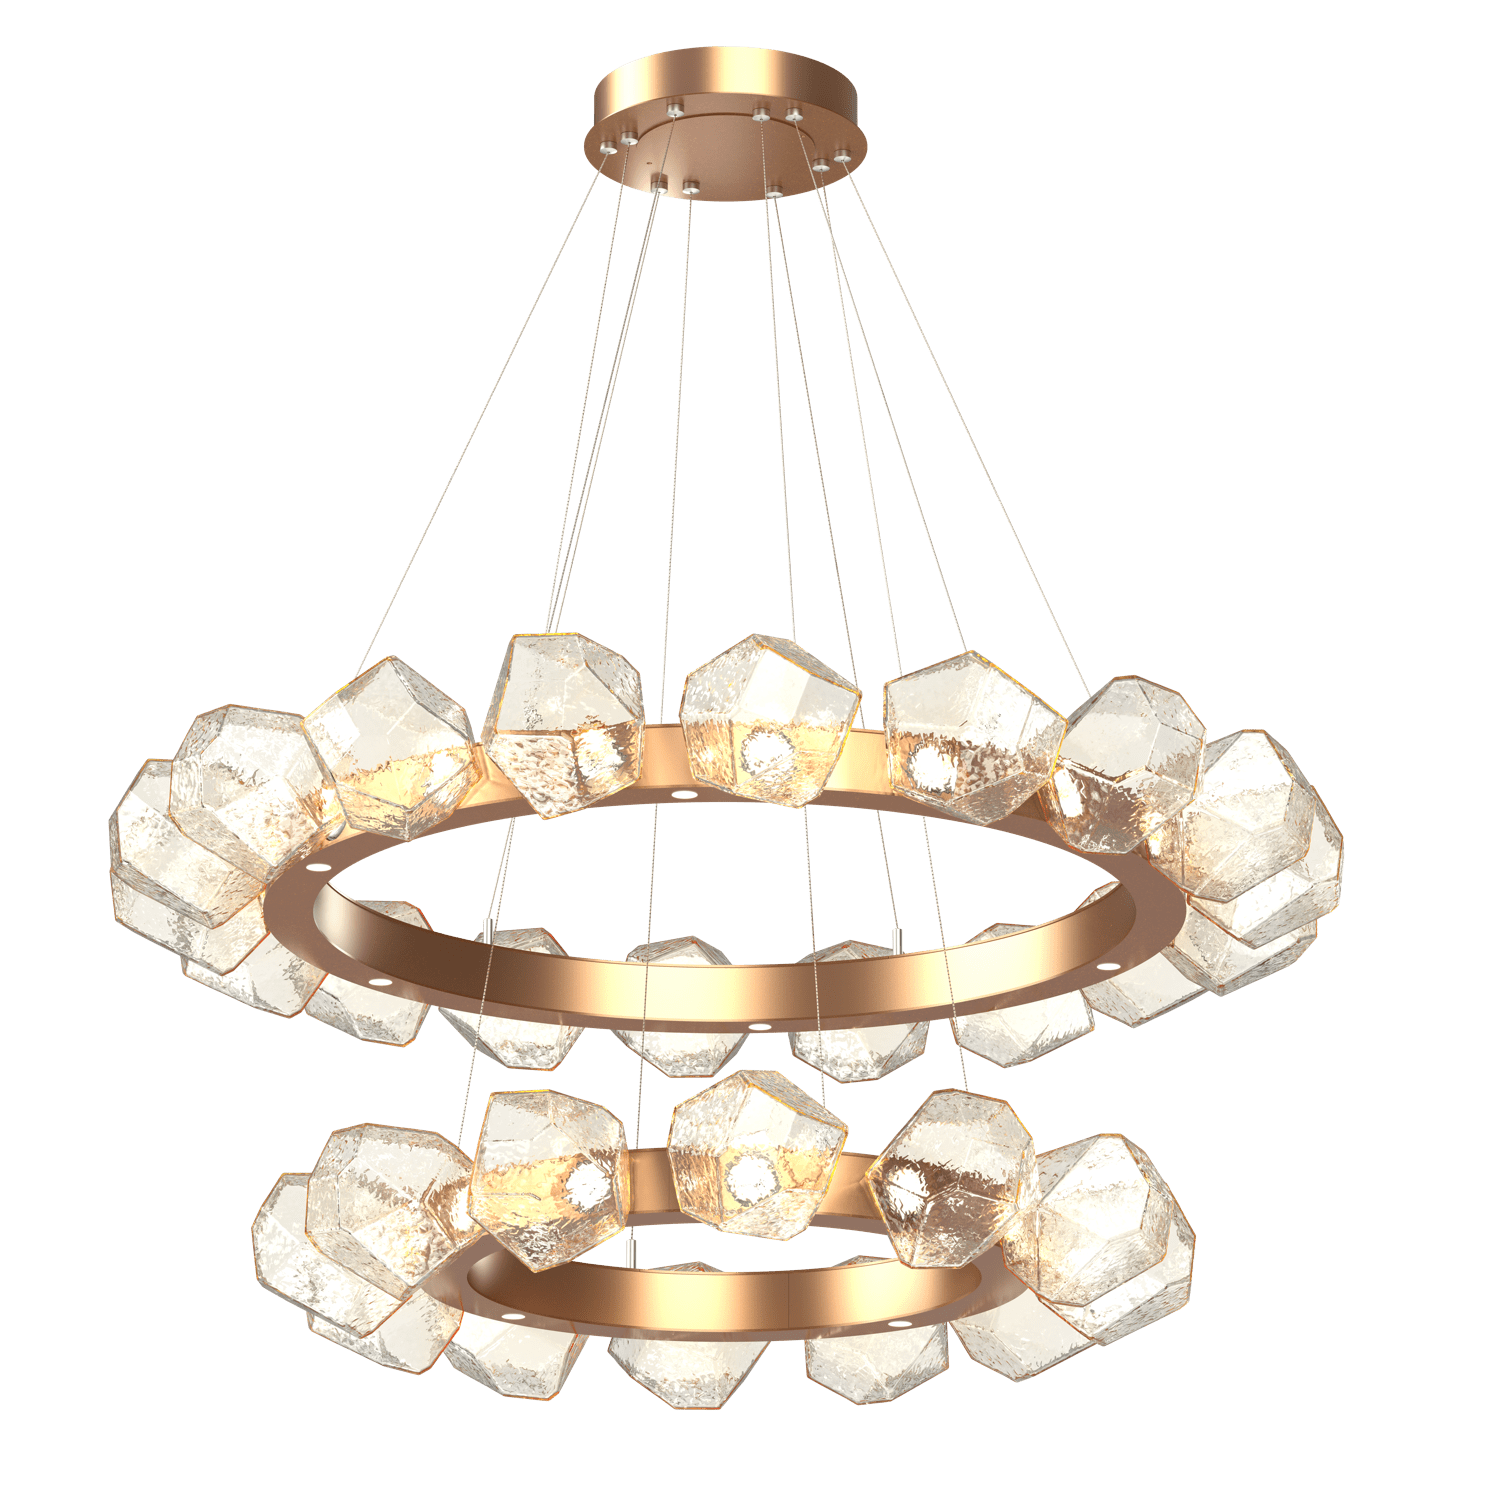 CHB0039-2T-NB-A-Hammerton-Studio-Gem-48-inch-two-tier-radial-ring-chandelier-with-novel-brass-finish-and-amber-blown-glass-shades-and-LED-lamping